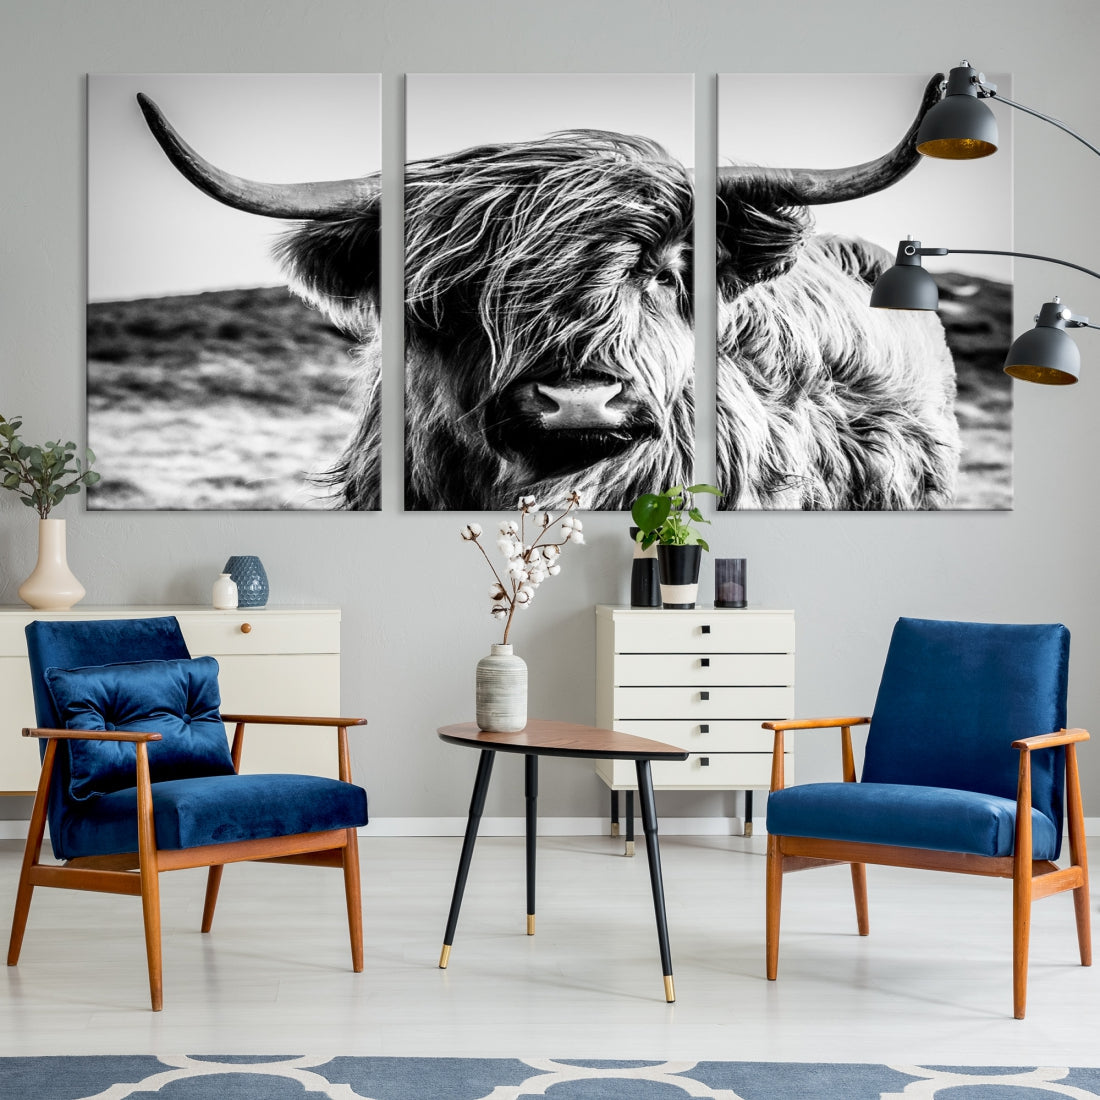 Black and White Scottish Cow Canvas Wall Art Highland Cattle Canvas Print